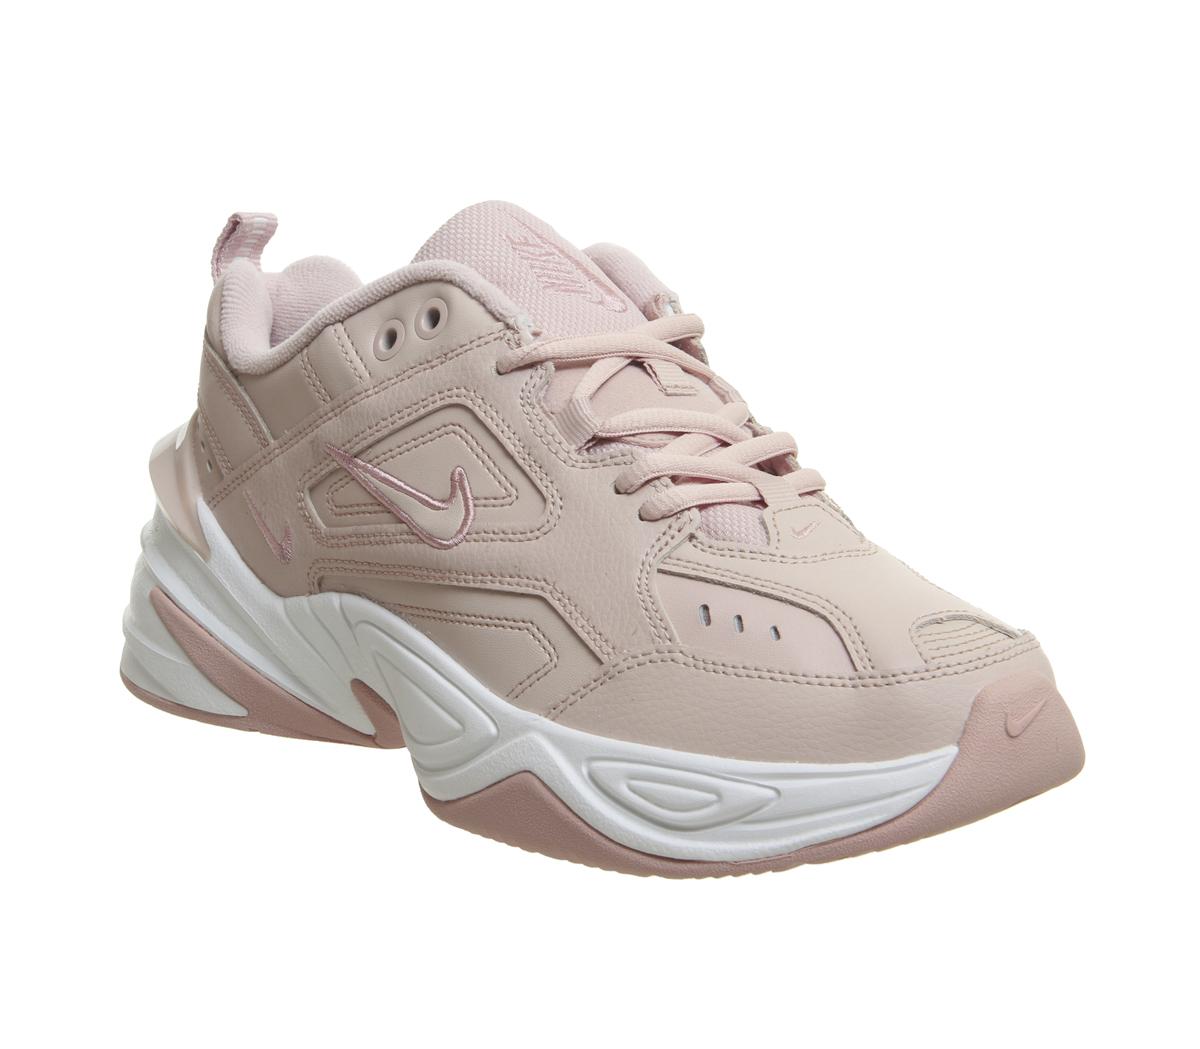 Nike M2k Tekno Trainers Particle Beige 